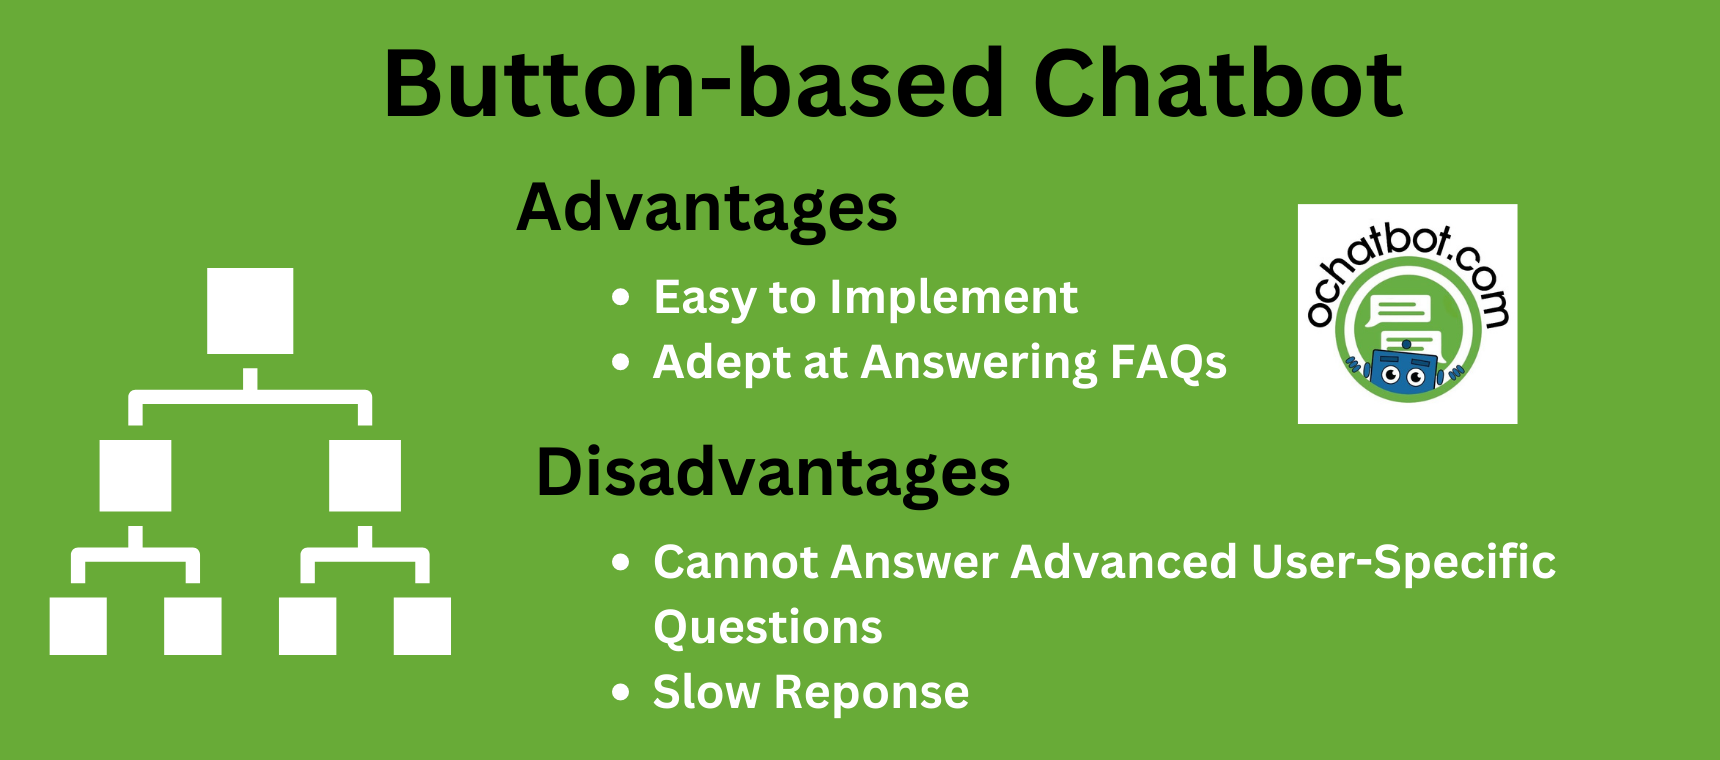 Button-Based Chatbot